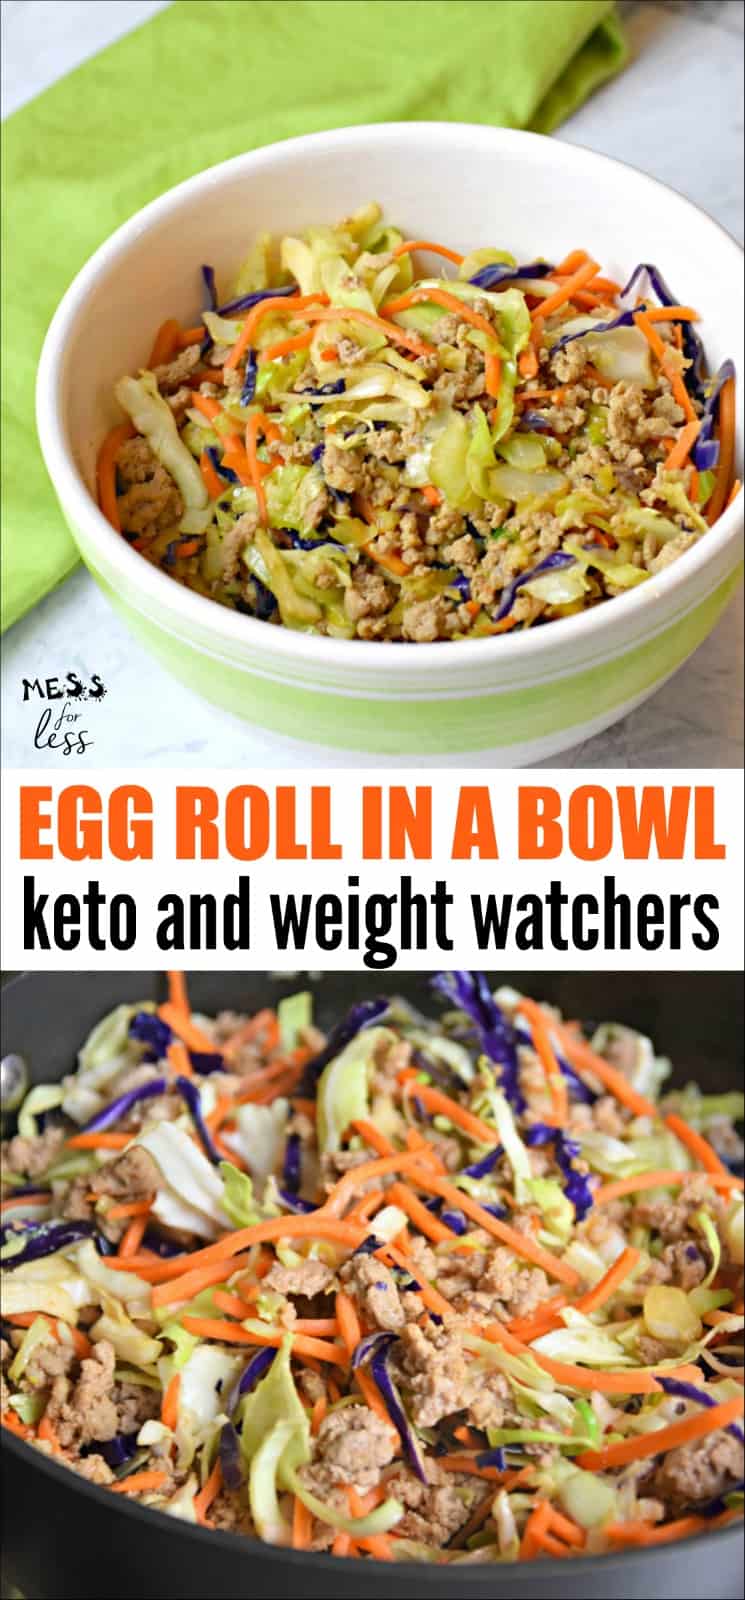 This Keto Egg Roll in a Bowl is one of my favorite low carb meals. All of your favorite egg roll flavors in this Keto Crack Slaw. Perfect for Keto or Weight Watchers diets. #eggrollinabowl #keto #lowcarb #weightwatchers #ketorecipes